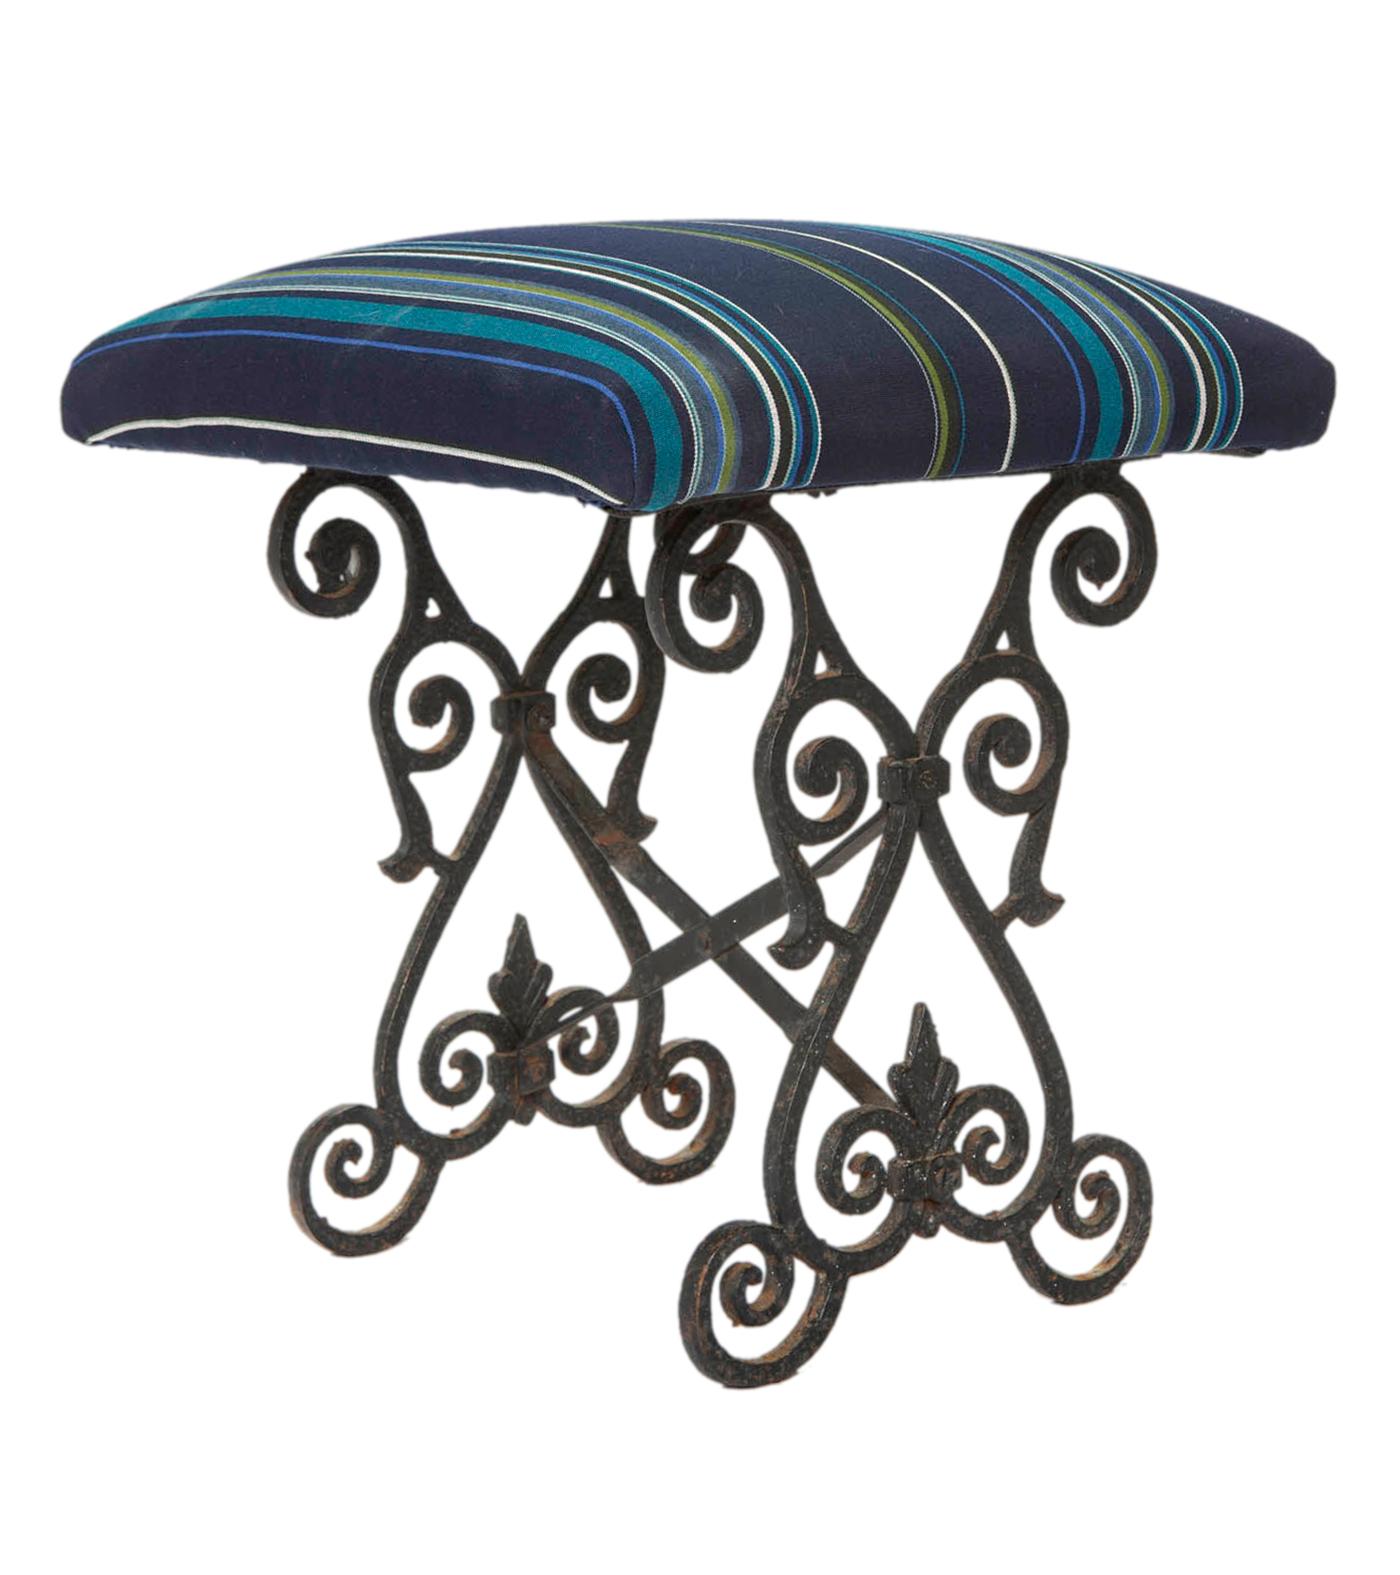 Deco handcrafted iron base with hammered iron and ornate scrolls.
The seat, on an oak platform has new upholstery in an indoor/outdoor Sunbrella stripe. New padding and paint. 